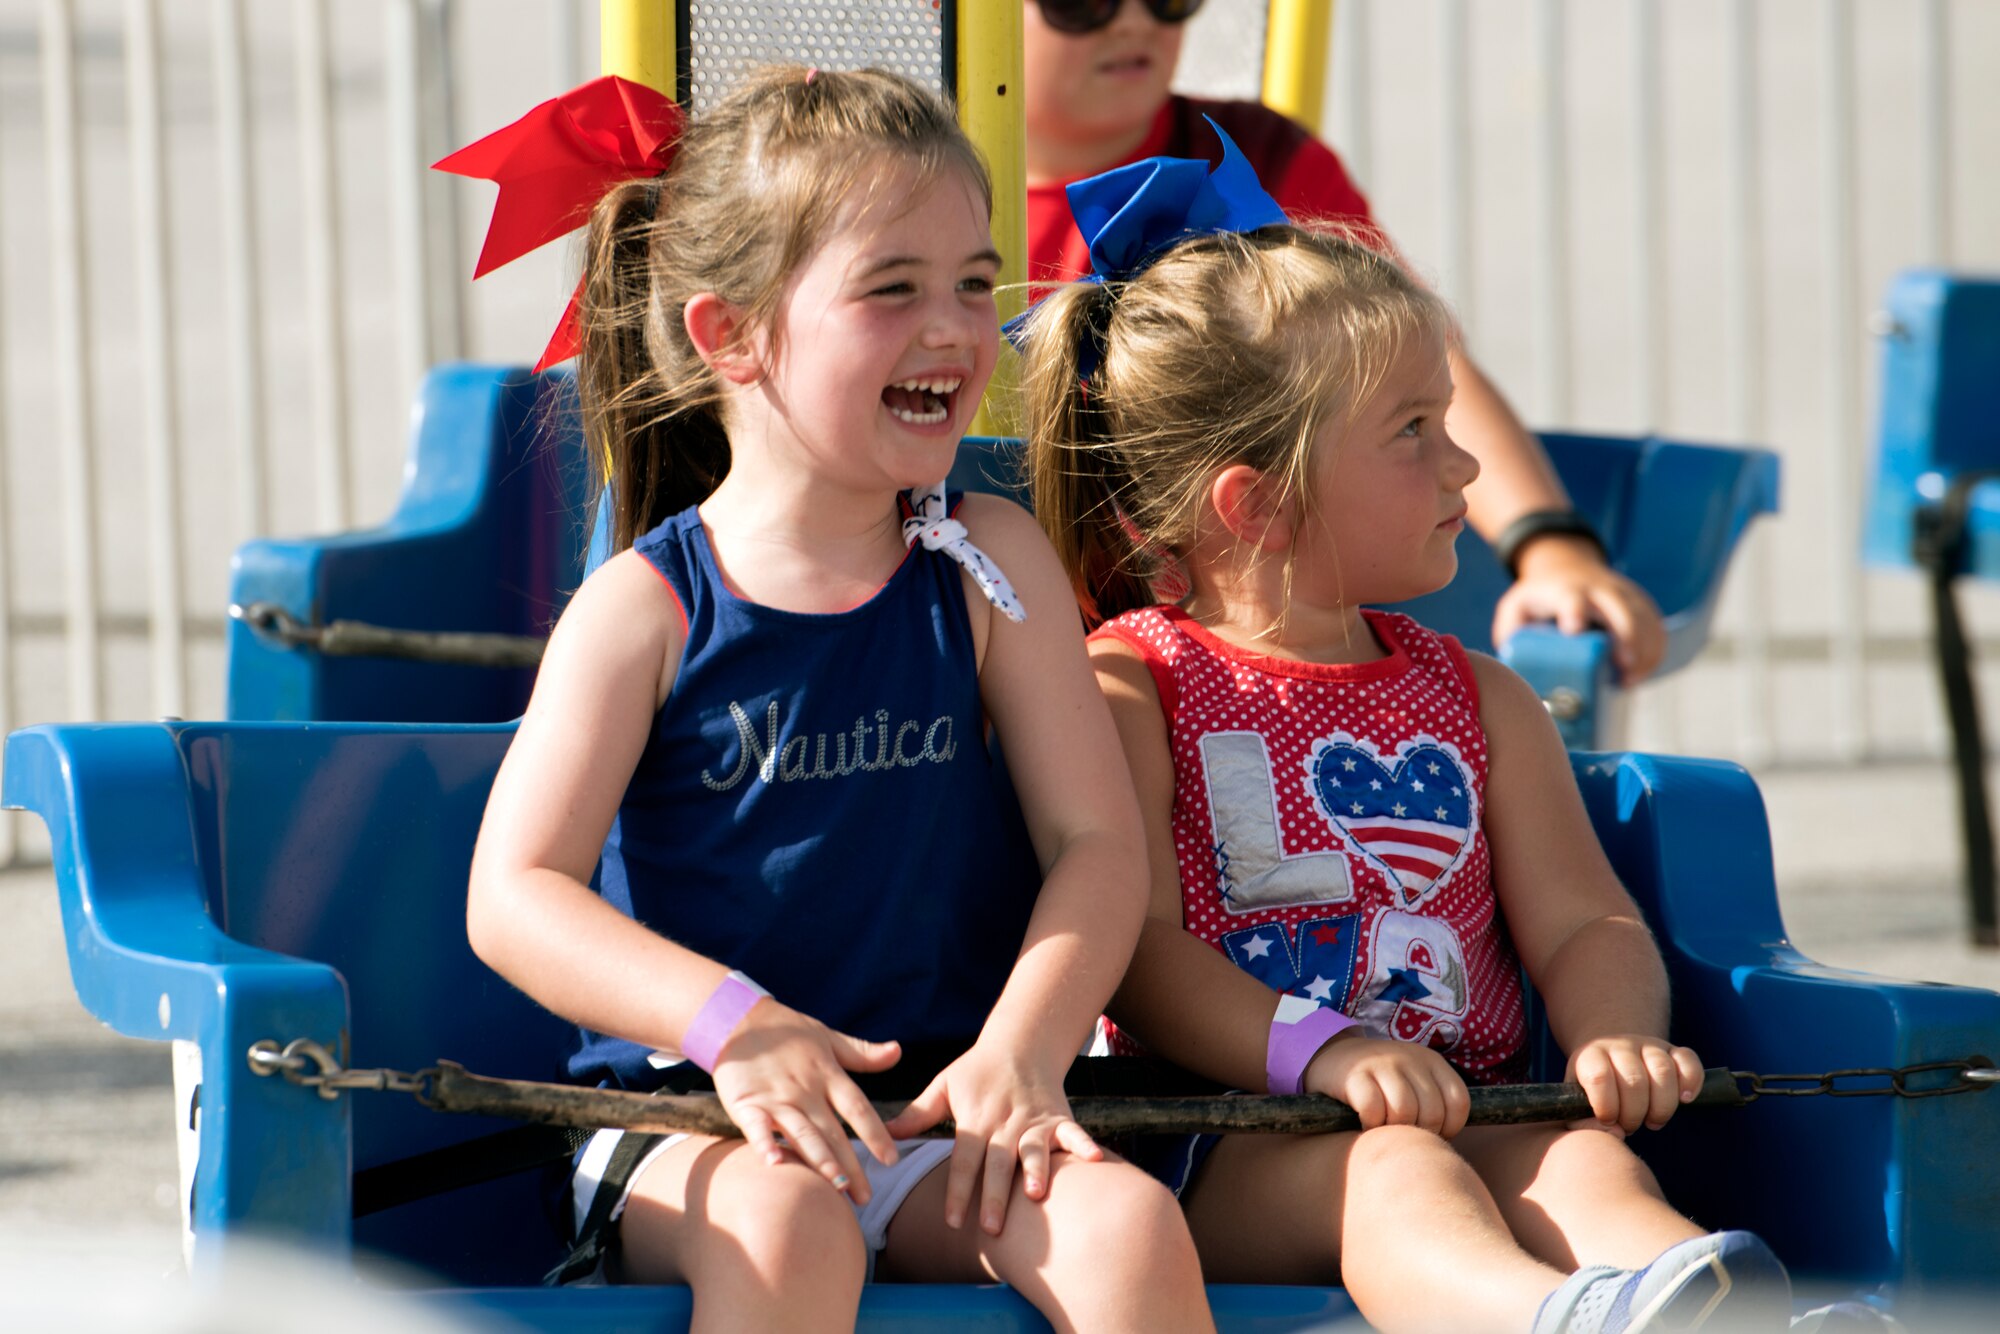 Team Shaw children sit in a ride during the 20th Force Support Squadron Freedom Bash at Shaw Air Force Base, South Carolina, June 29, 2019.